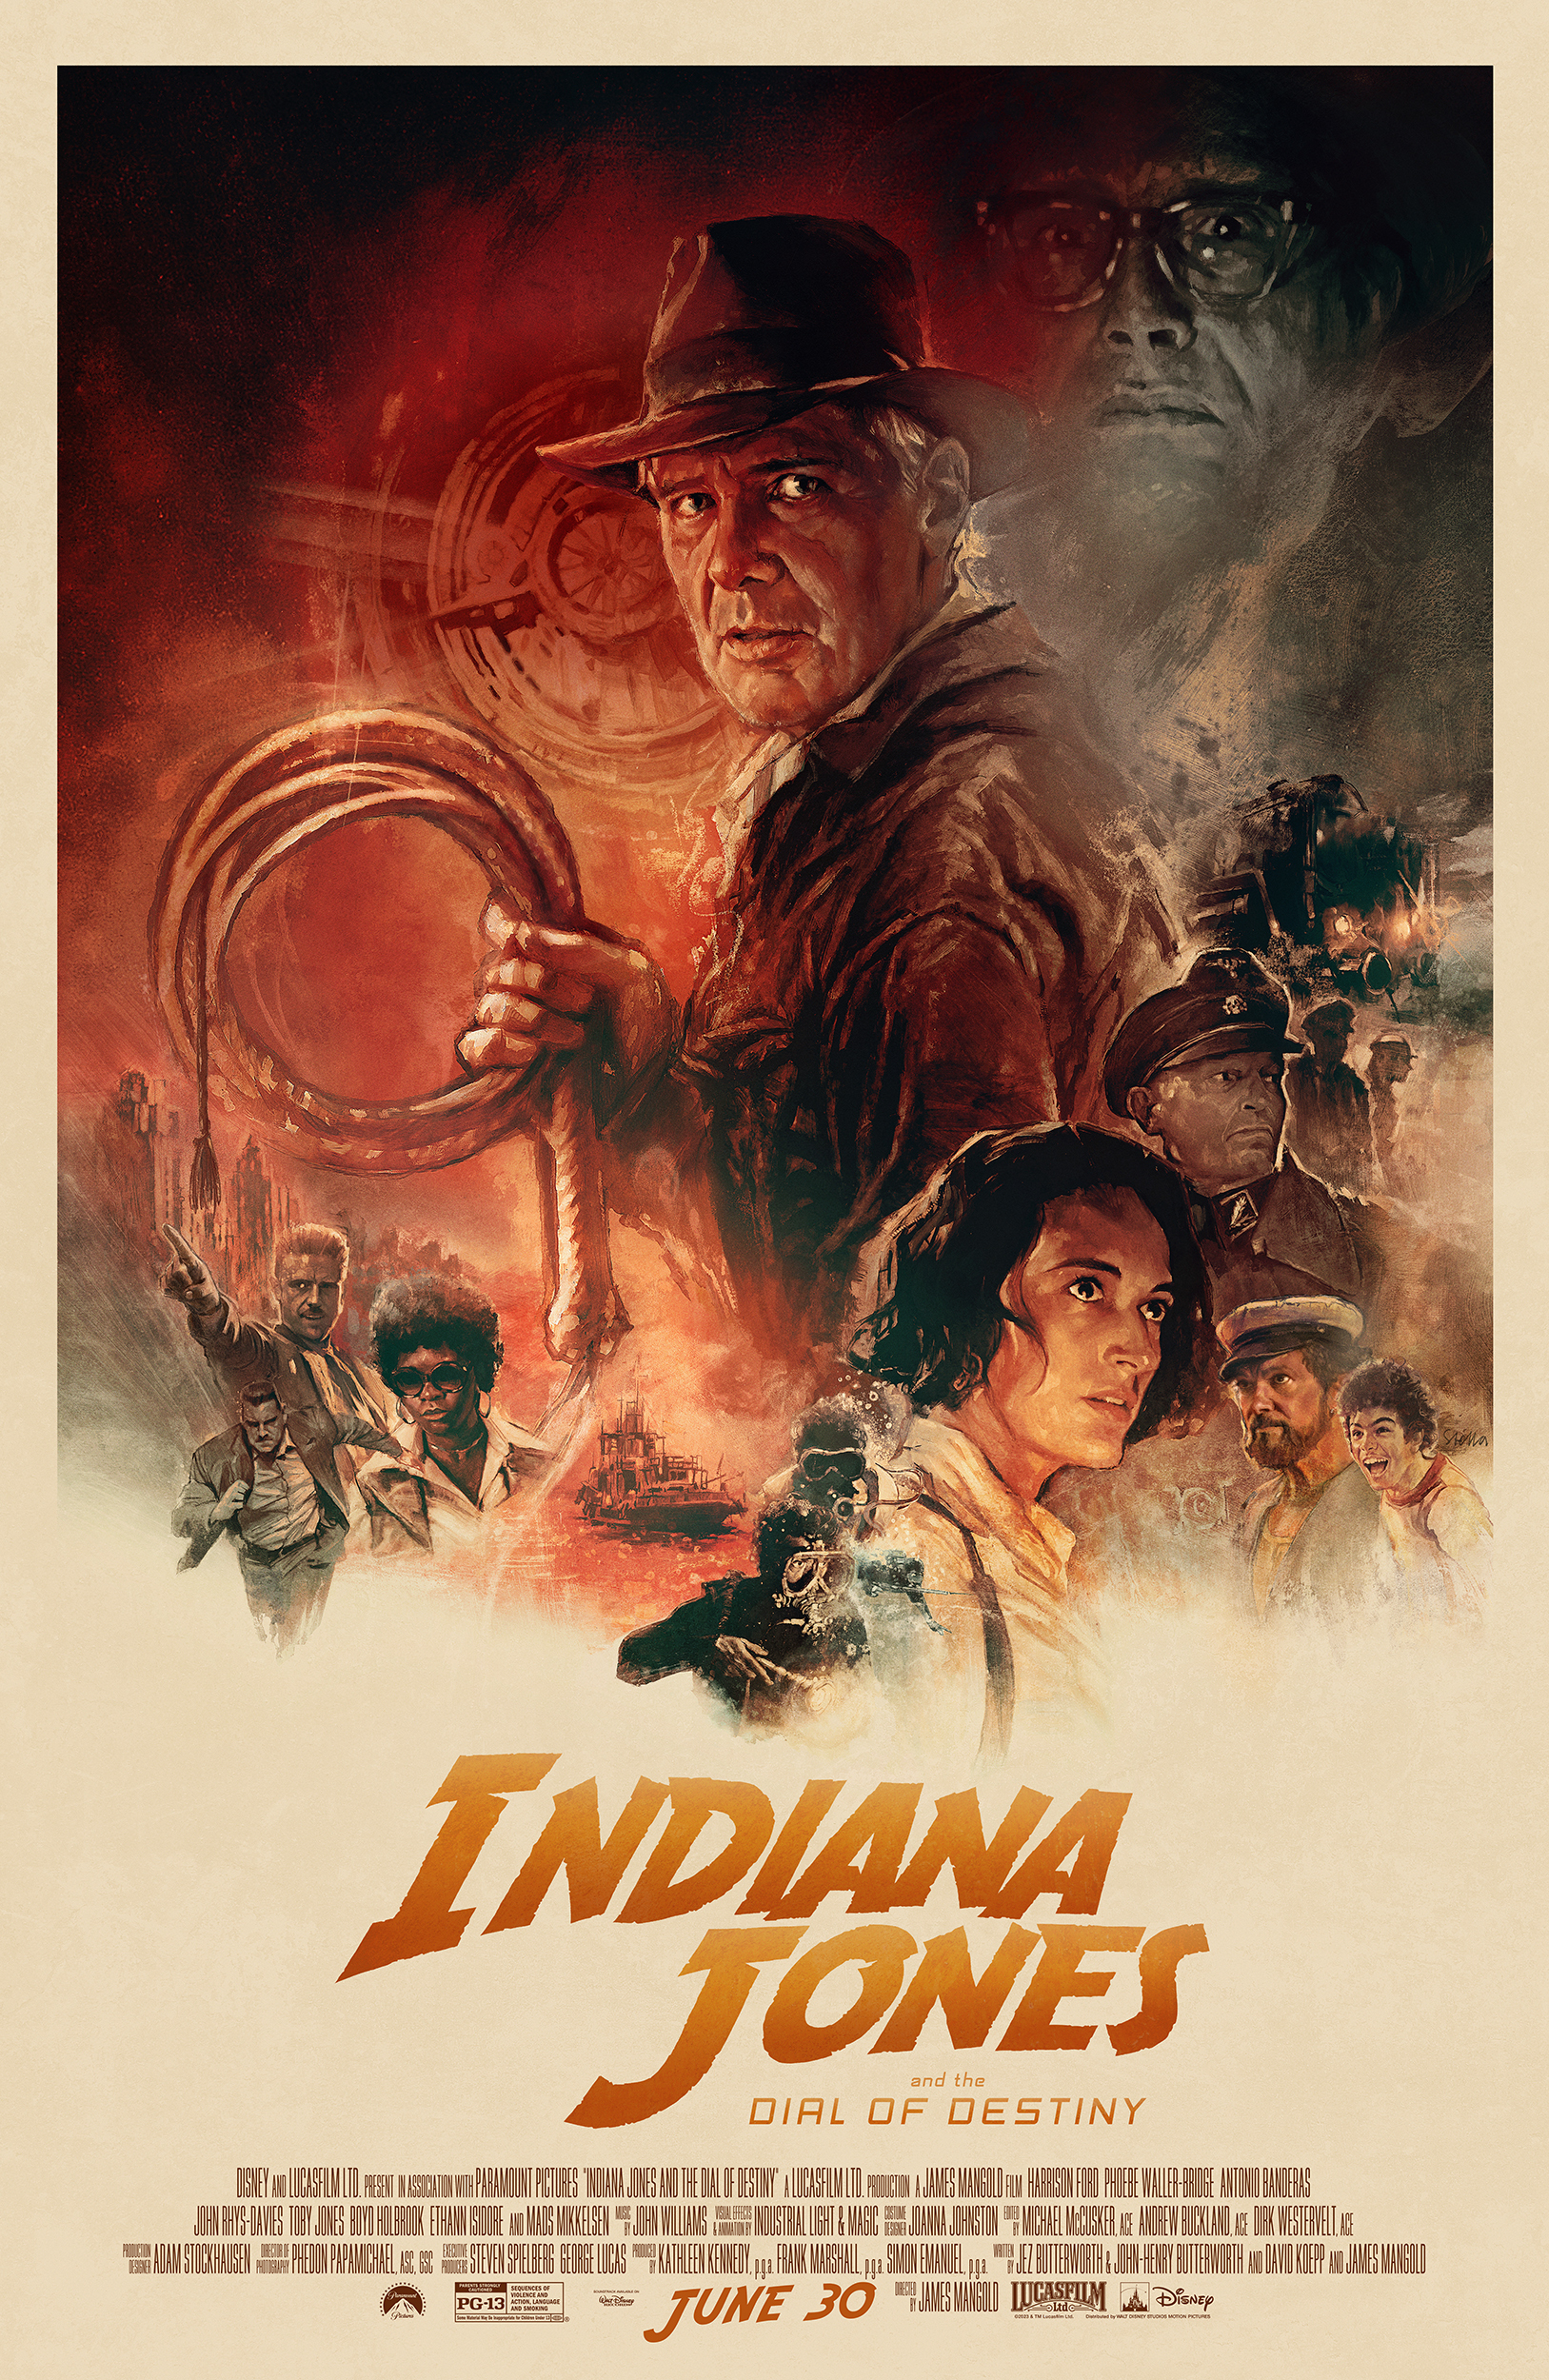 Indiana Jones Dial Of Destiny dvd cover - DVD Covers & Labels by